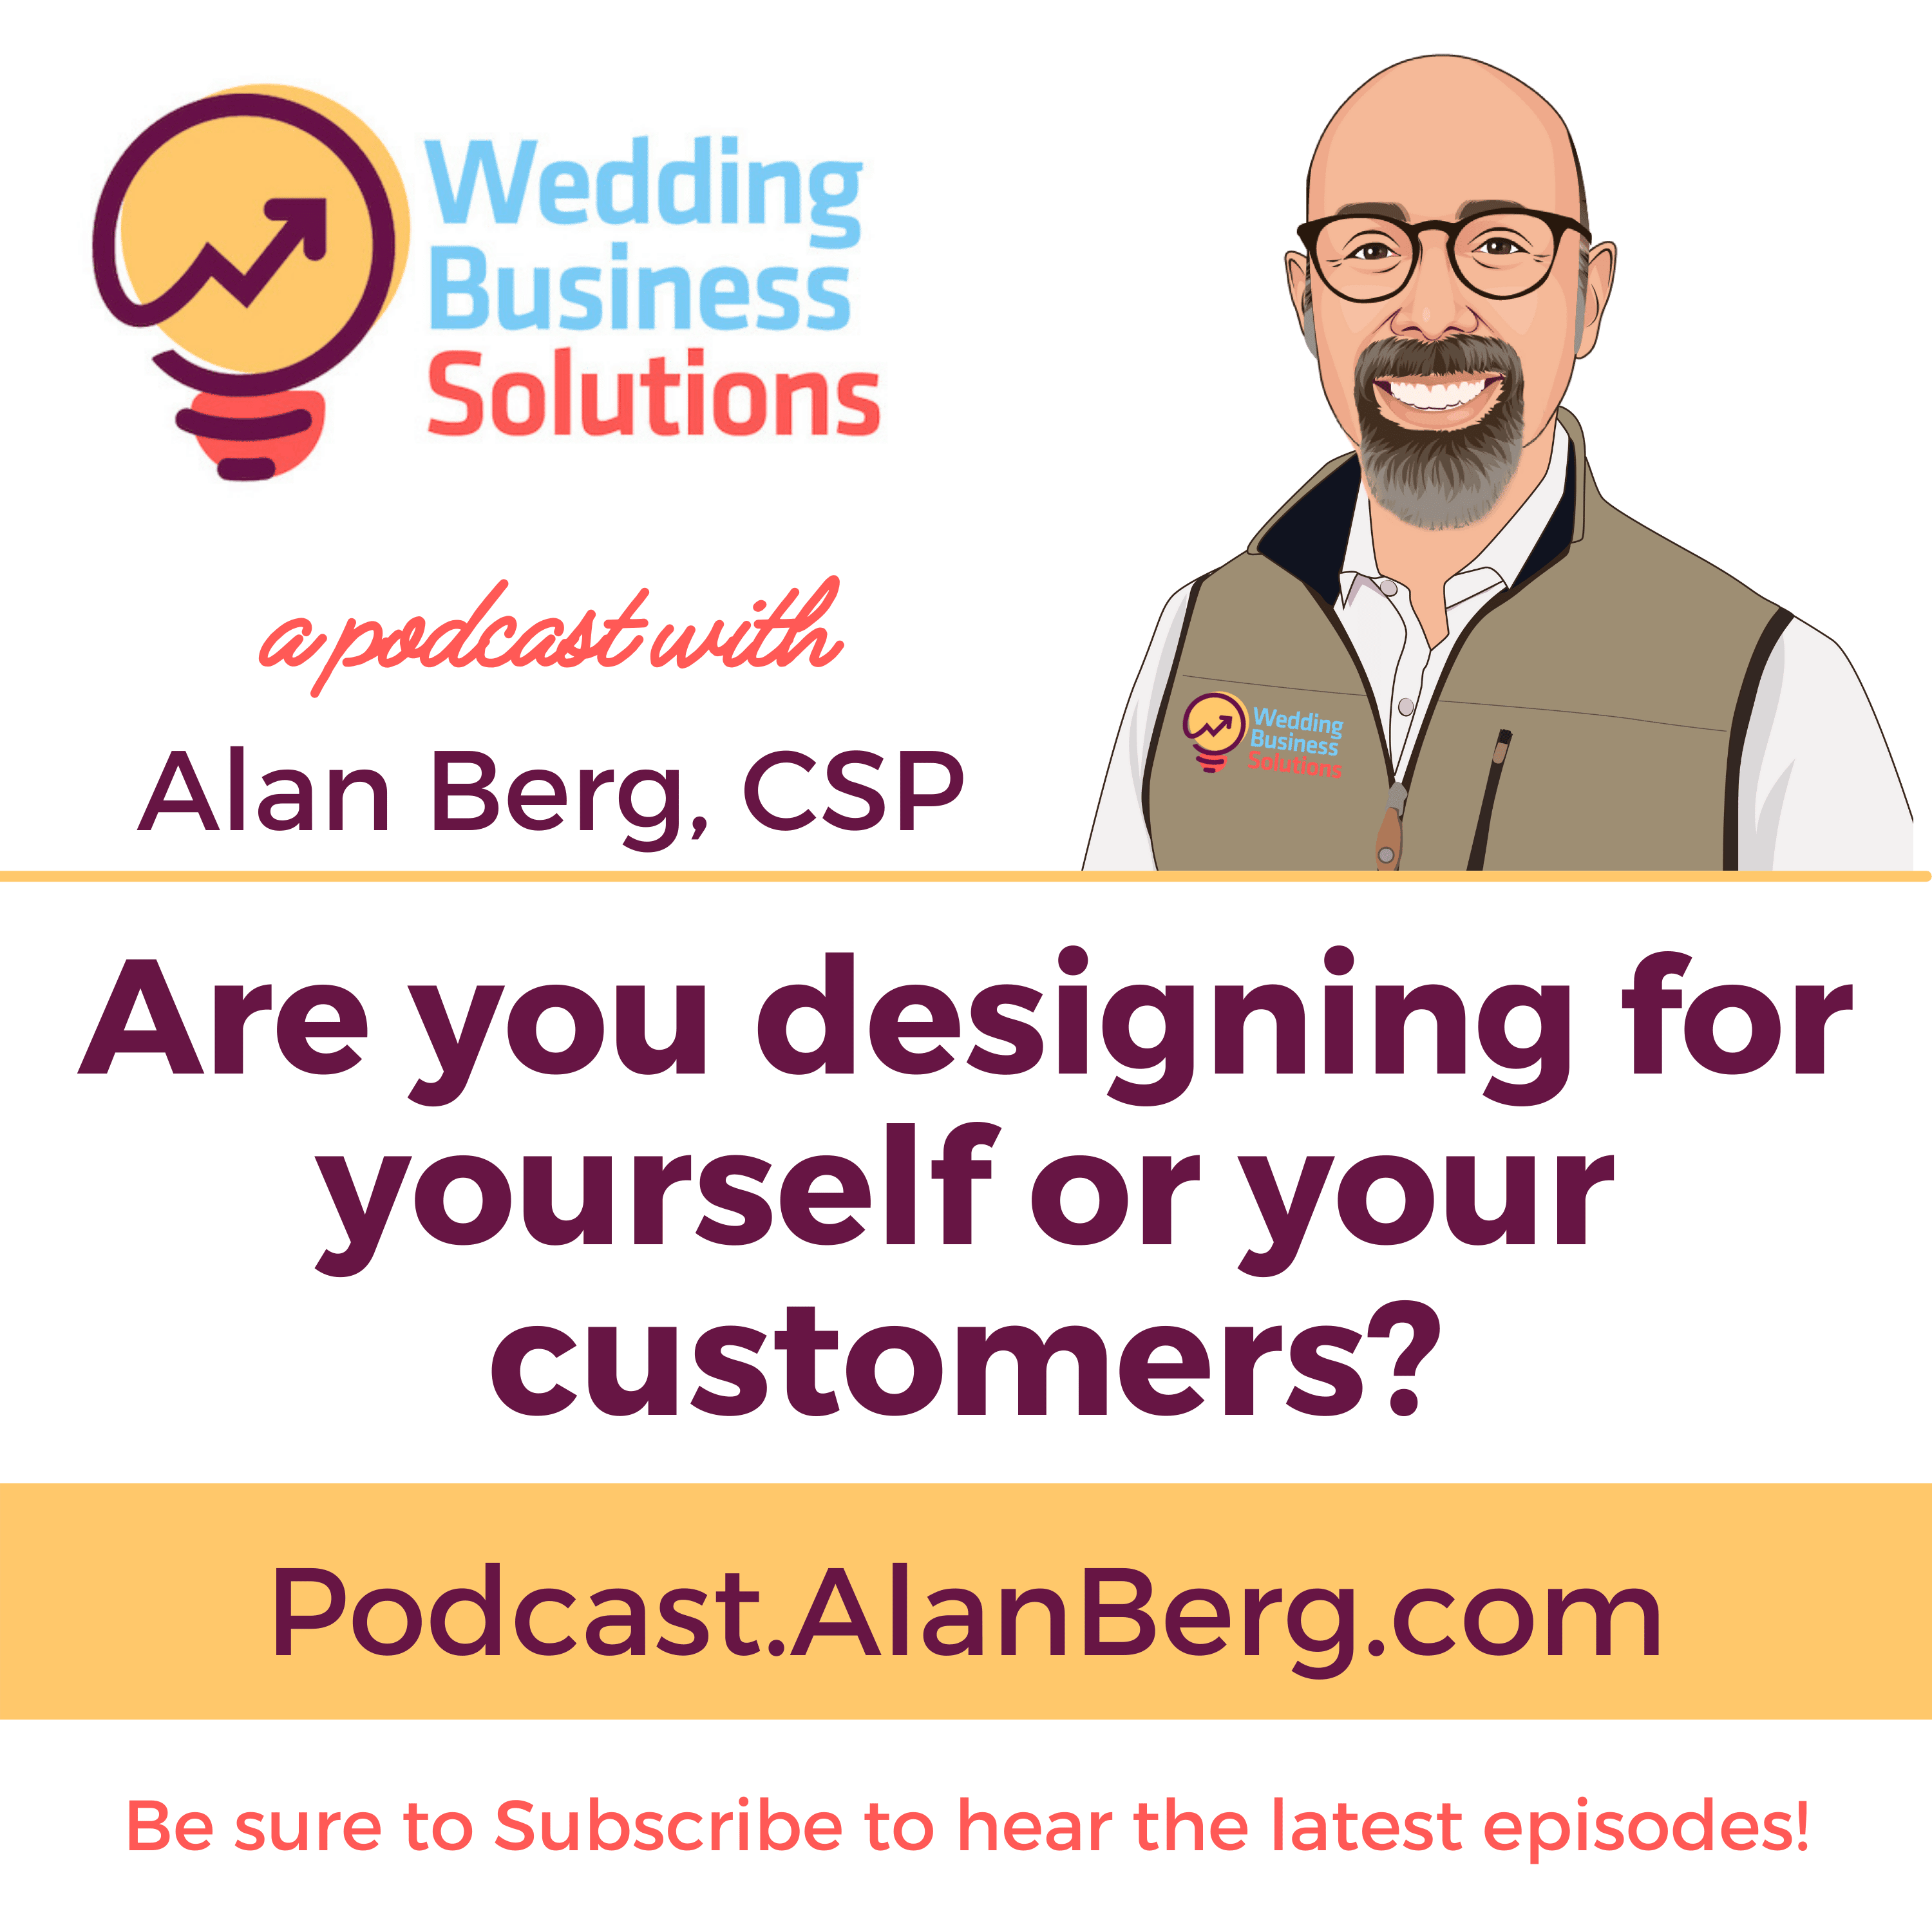 Are you designing for yourself or your customers - Alan Berg CSP, Wedding Business Solutions